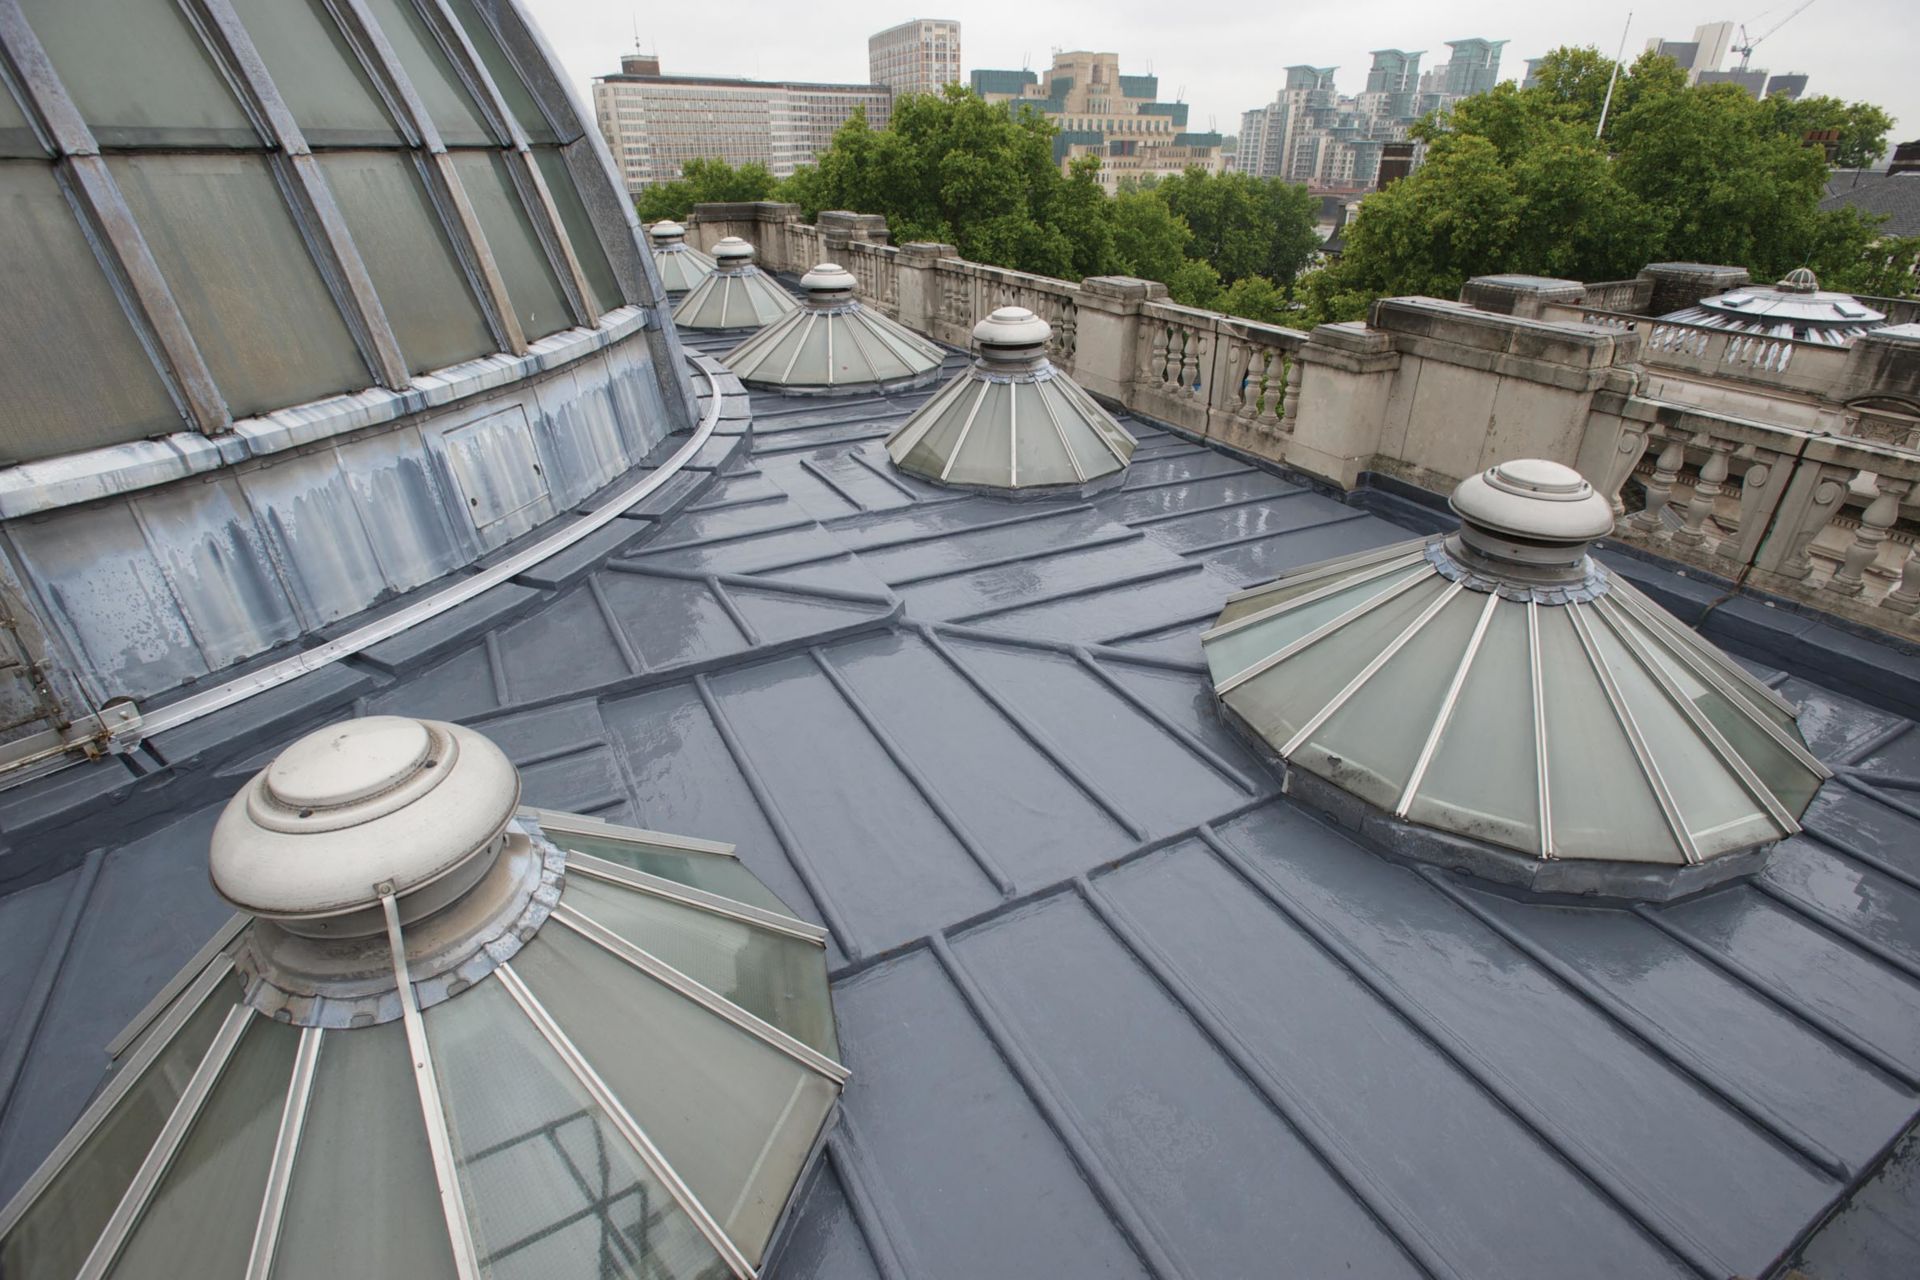 Refurbished roof of the Tate Britain Museum in London